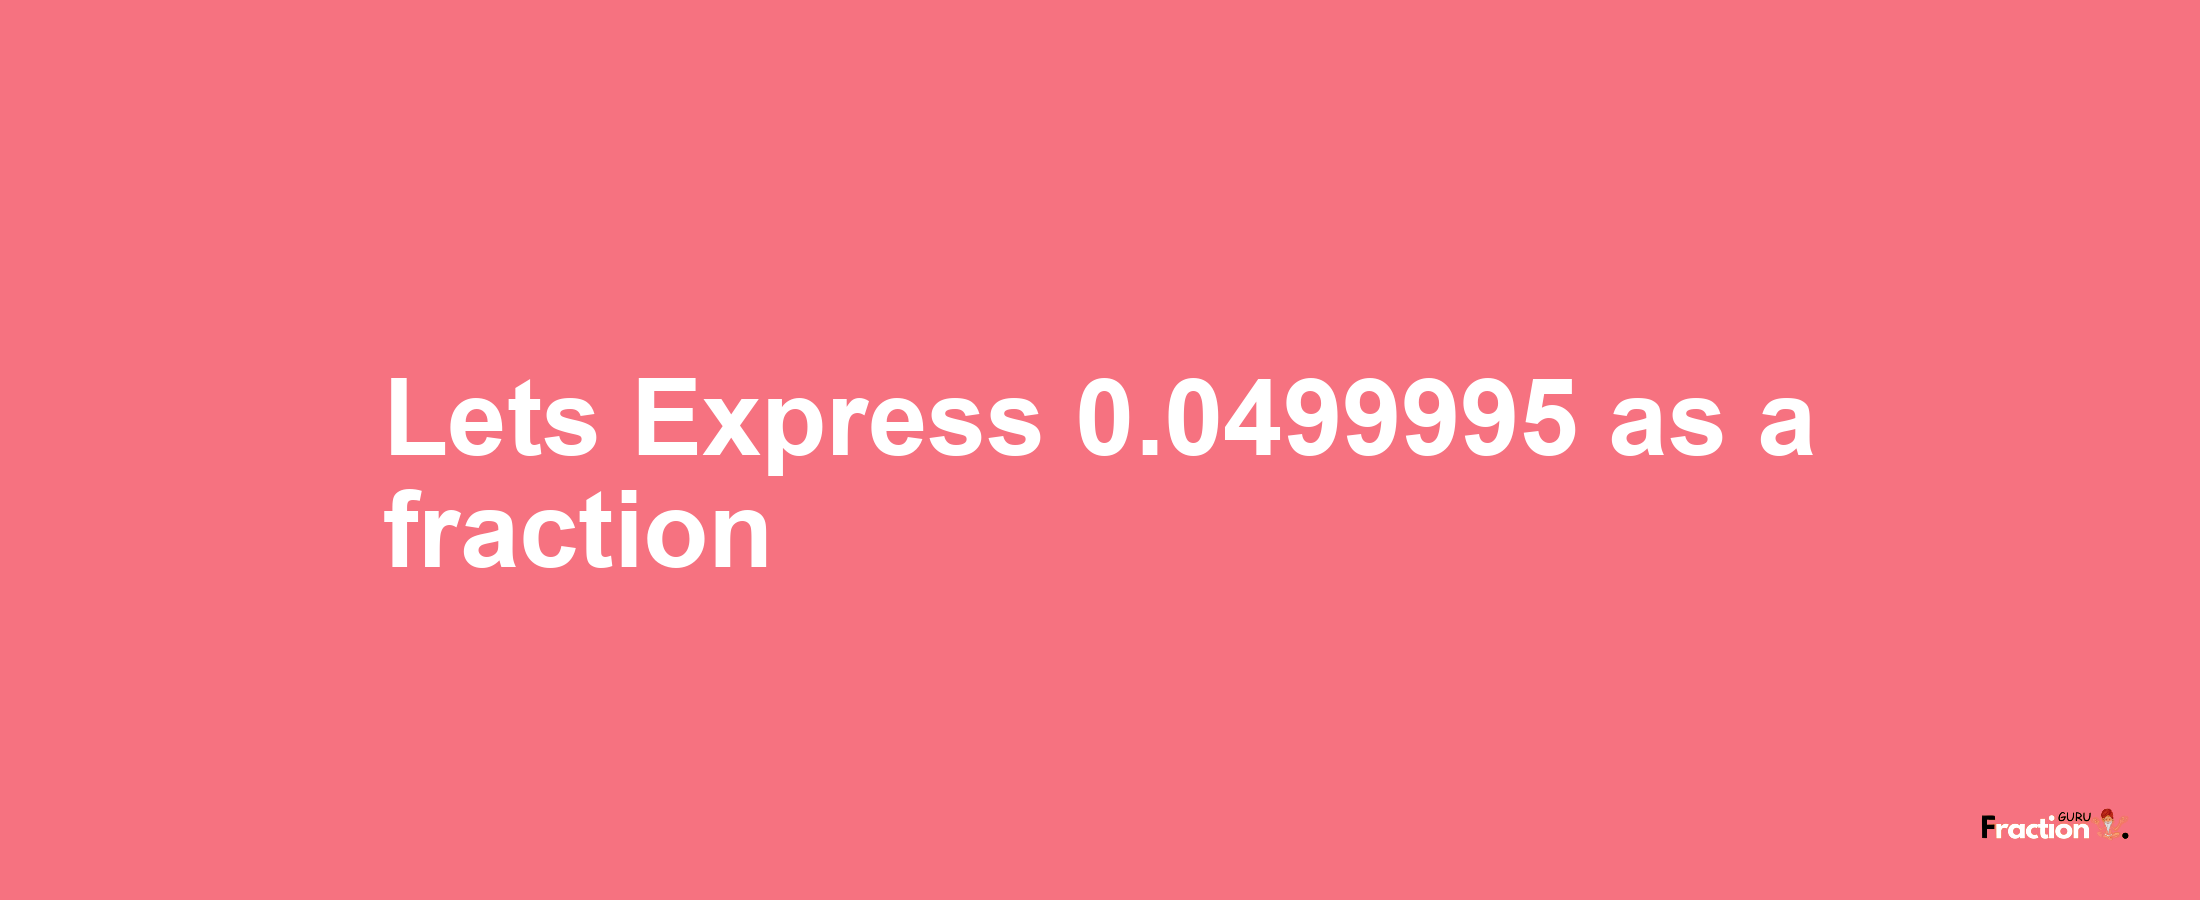 Lets Express 0.0499995 as afraction